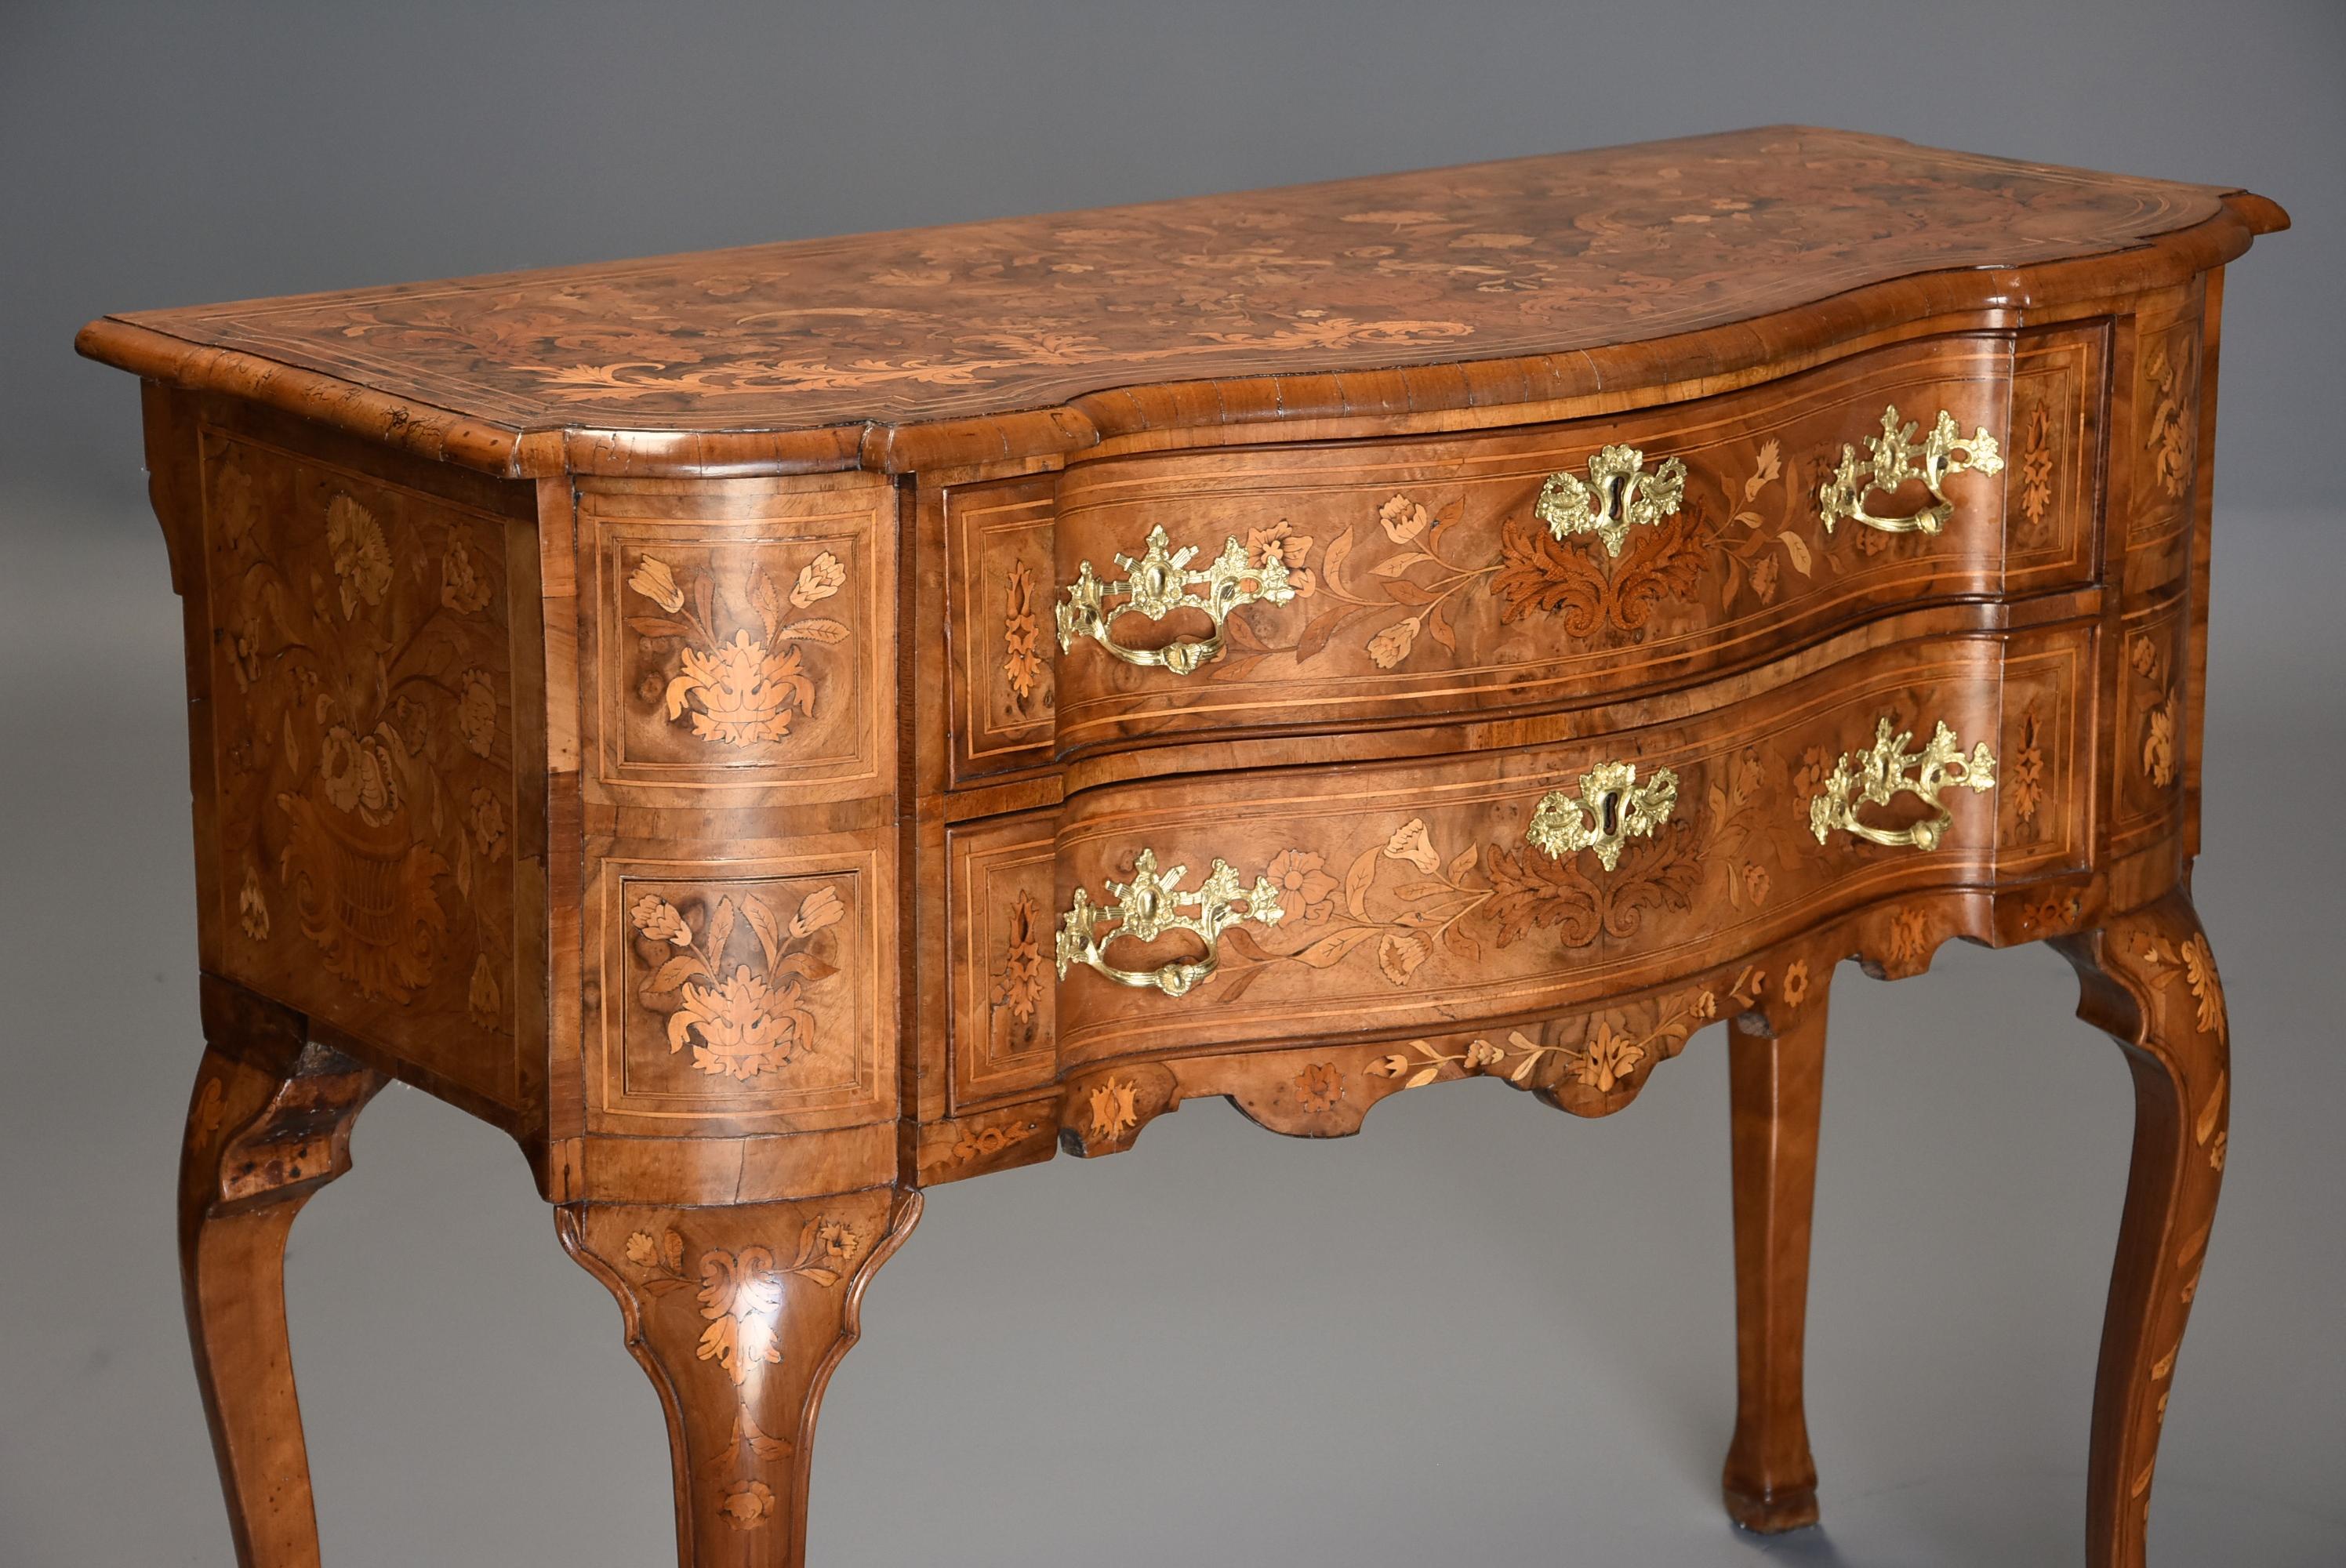 Fine Quality Mid-19th Century Floral Marquetry Walnut Lowboy of Serpentine Form For Sale 2